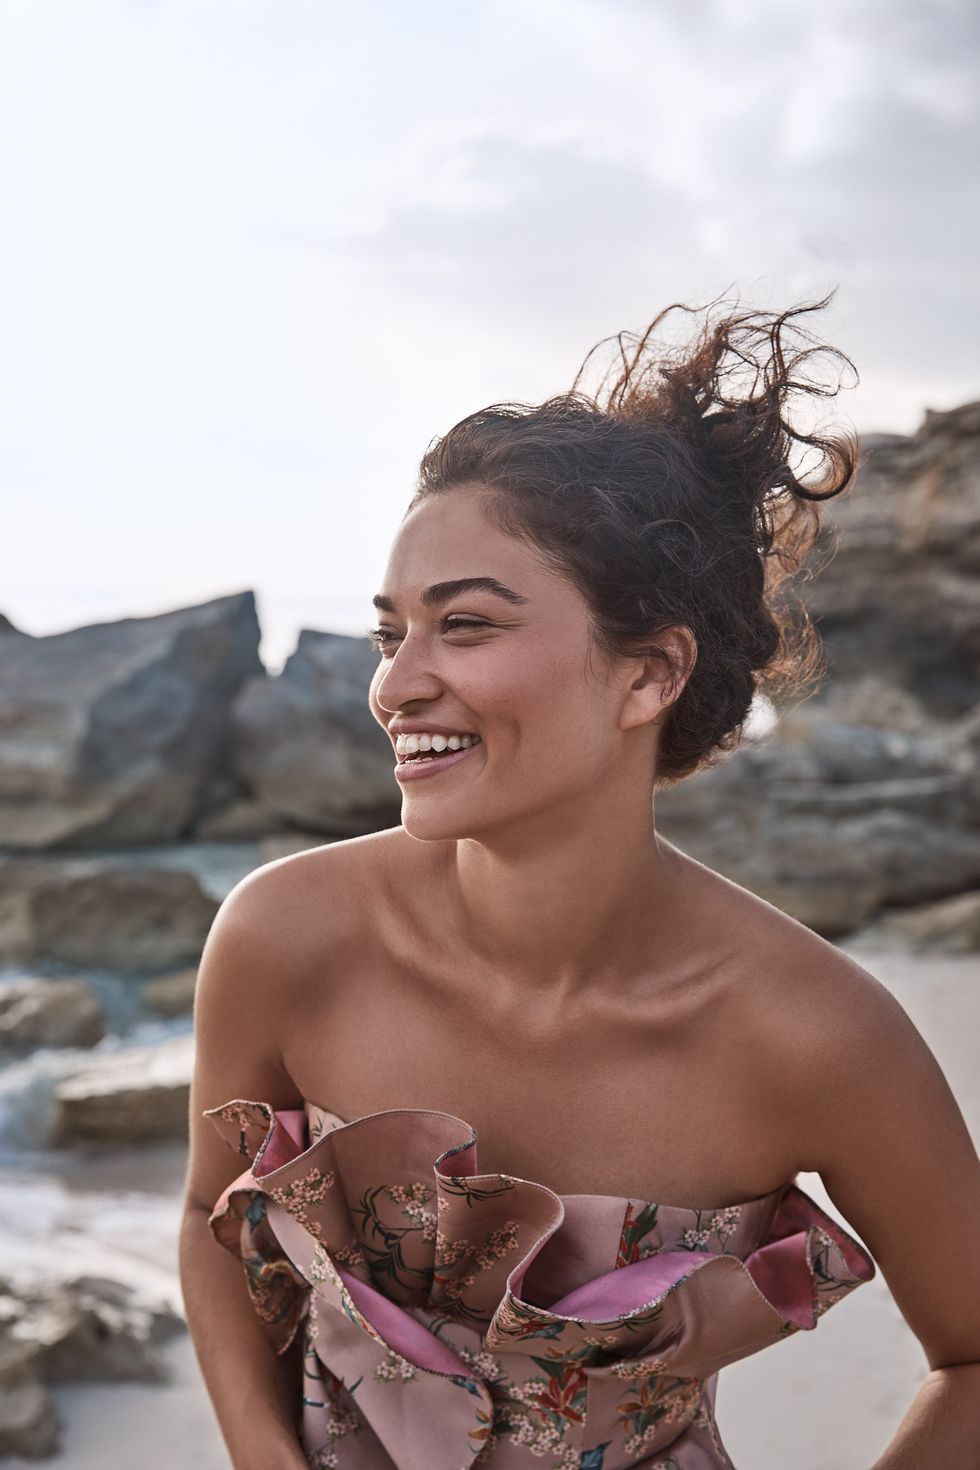 Facial expression, Skin, Beauty, Smile, Fun, Summer, Vacation, Dress, Photography, Happy, 